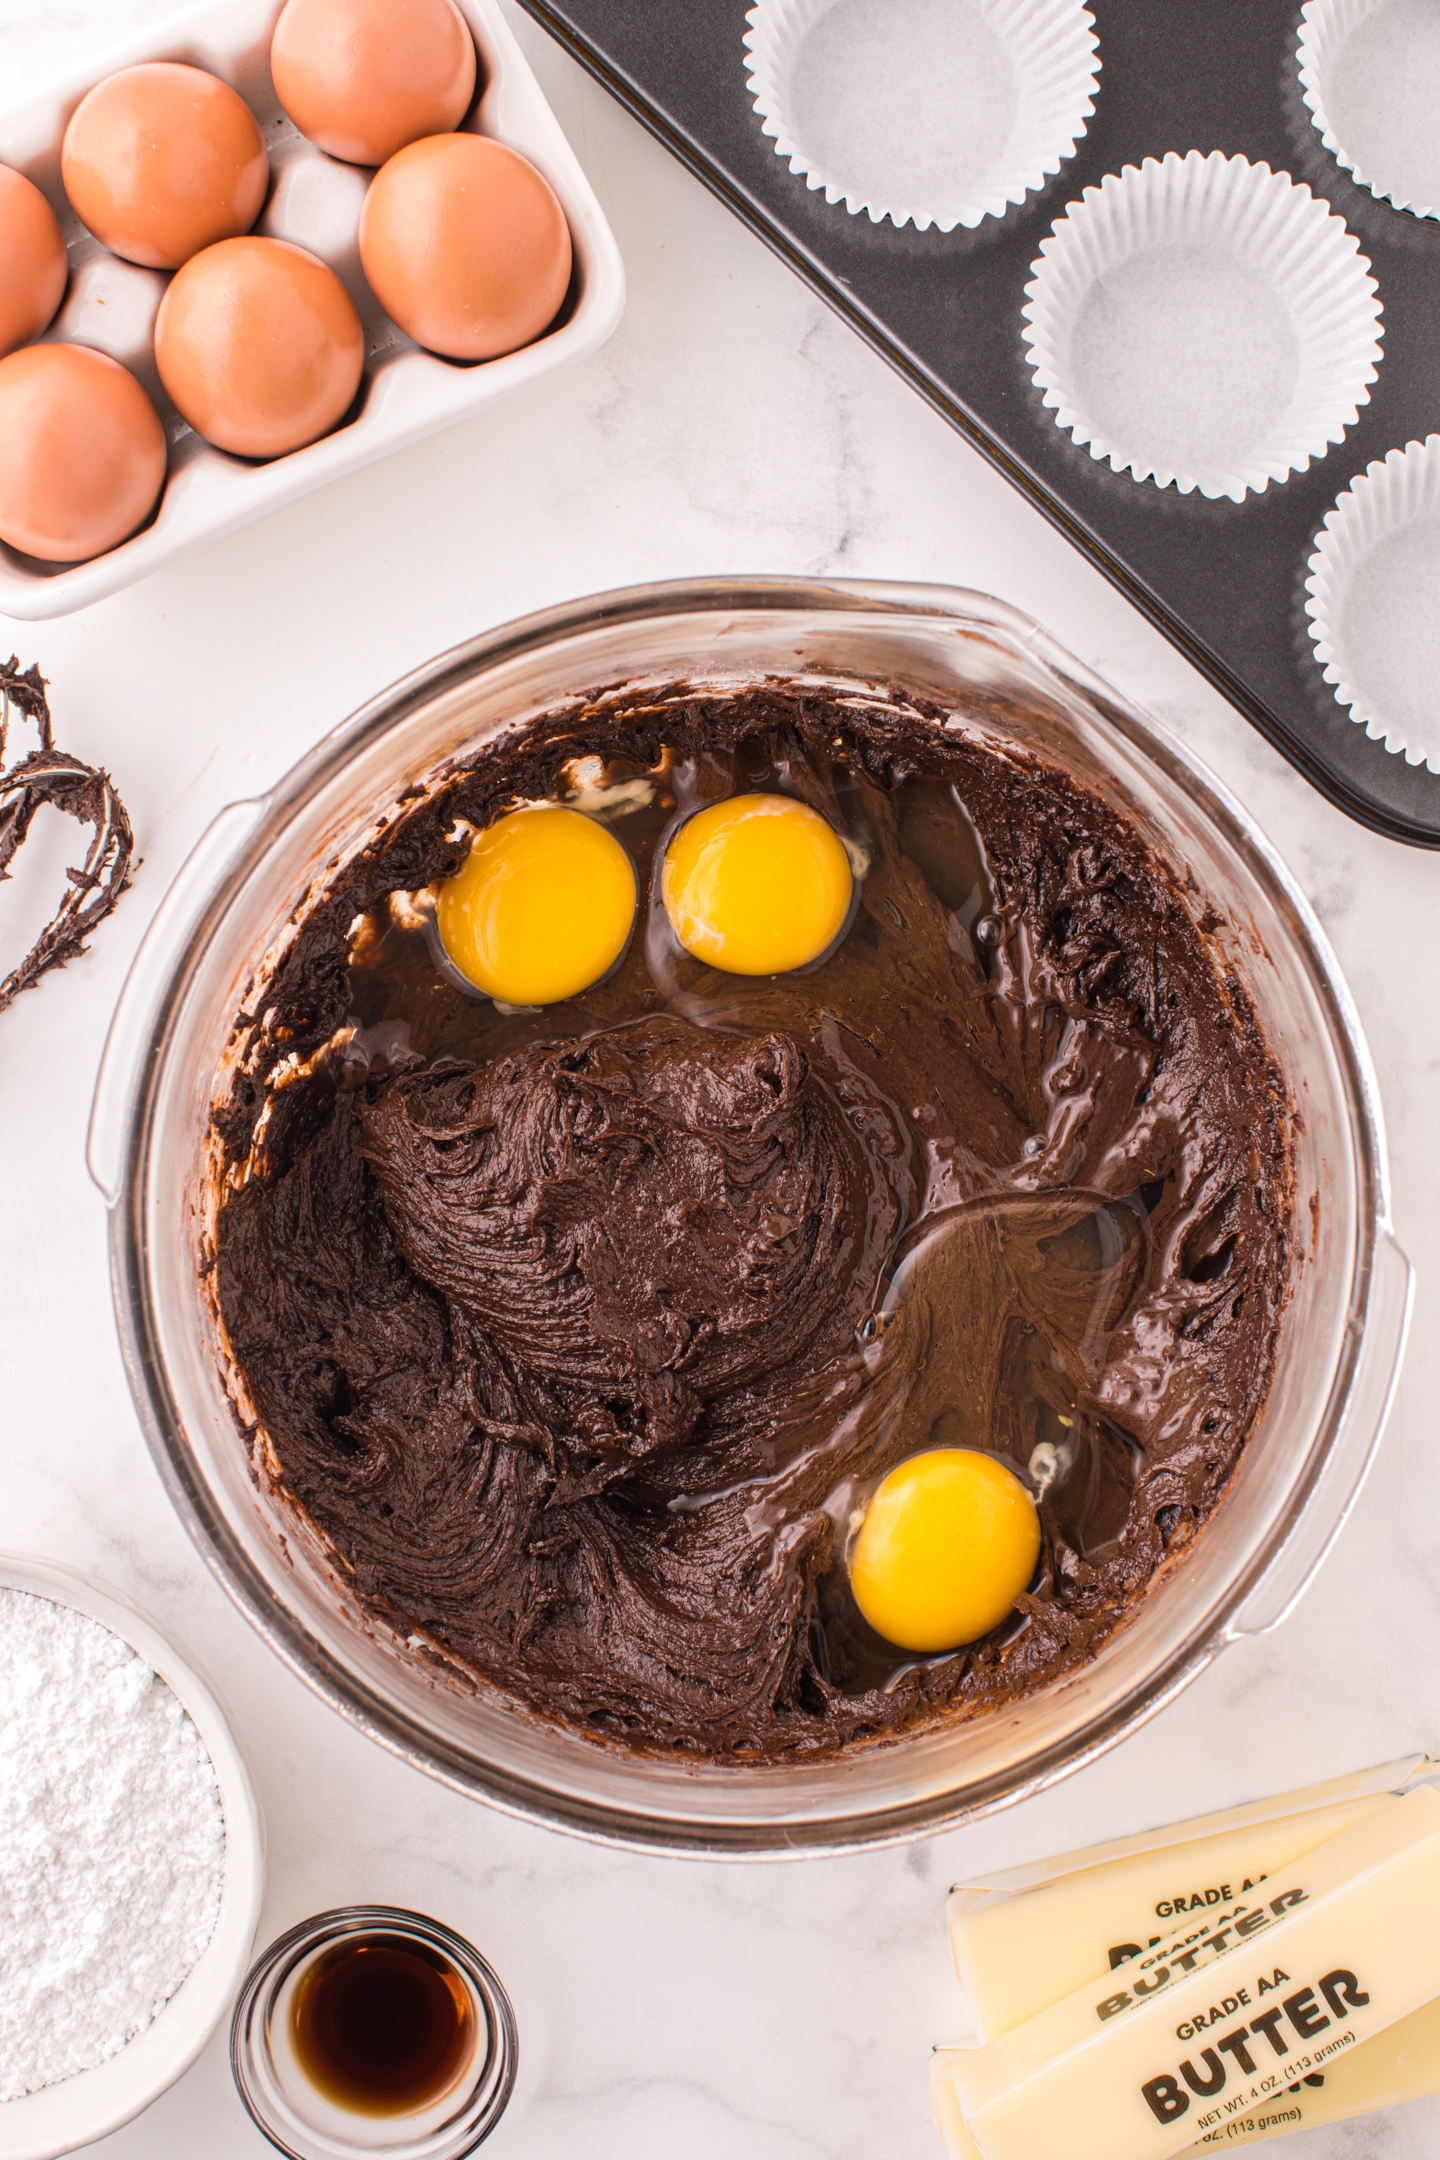 eggs added to chocolate cake batter